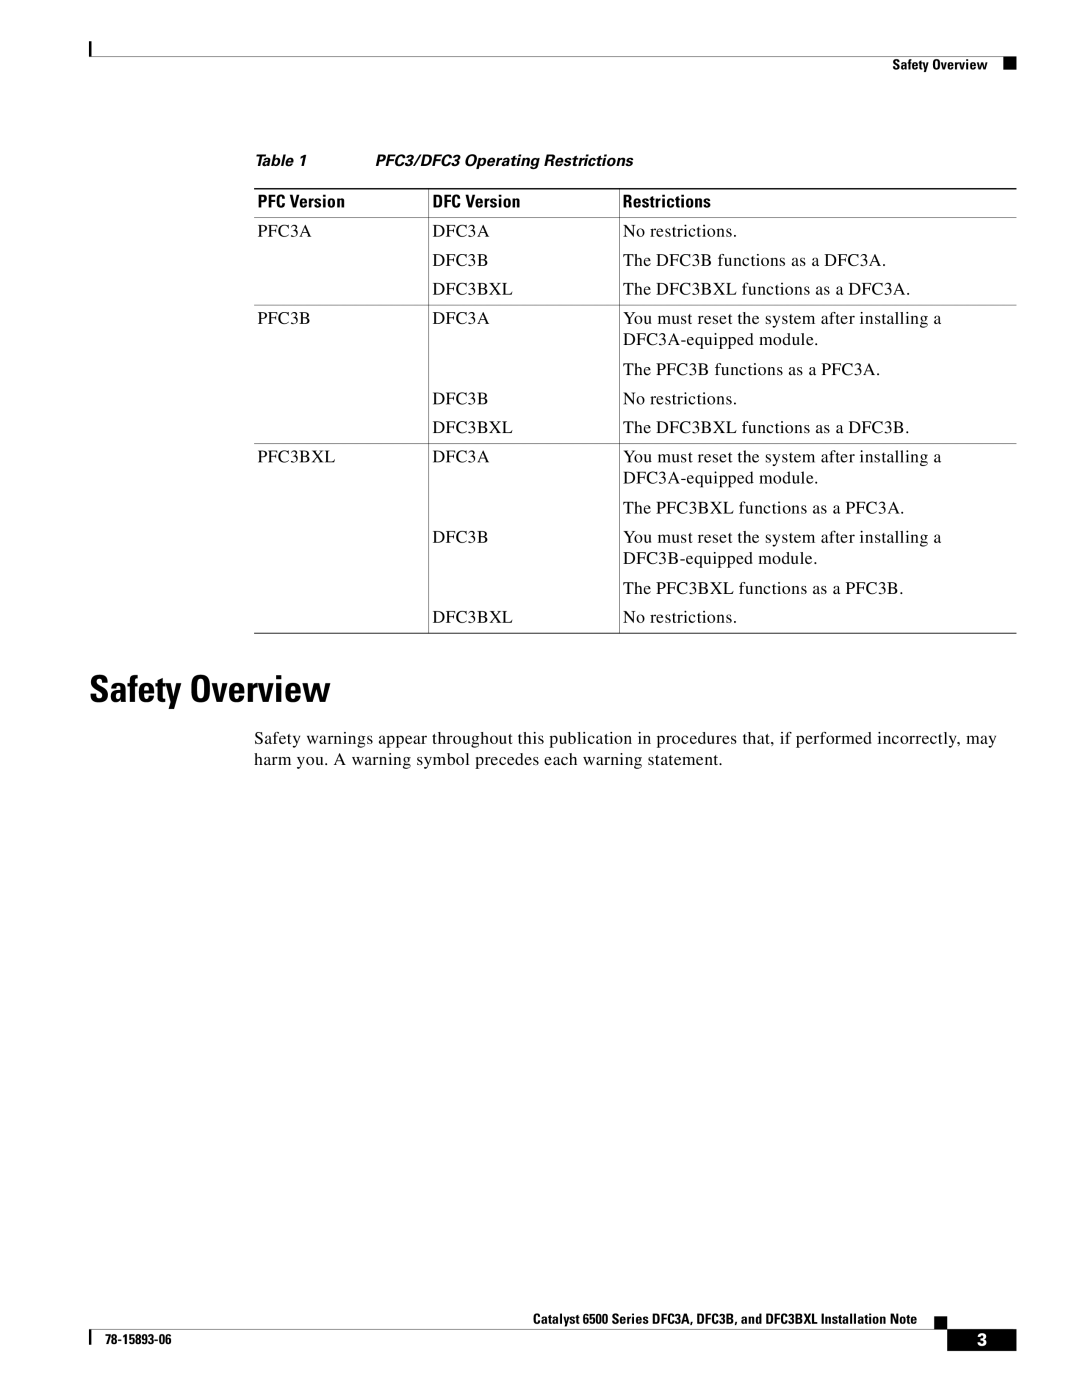 Cisco Systems DFC3BXL, DFC3A manual Safety Overview, PFC Version, DFC Version, Restrictions 